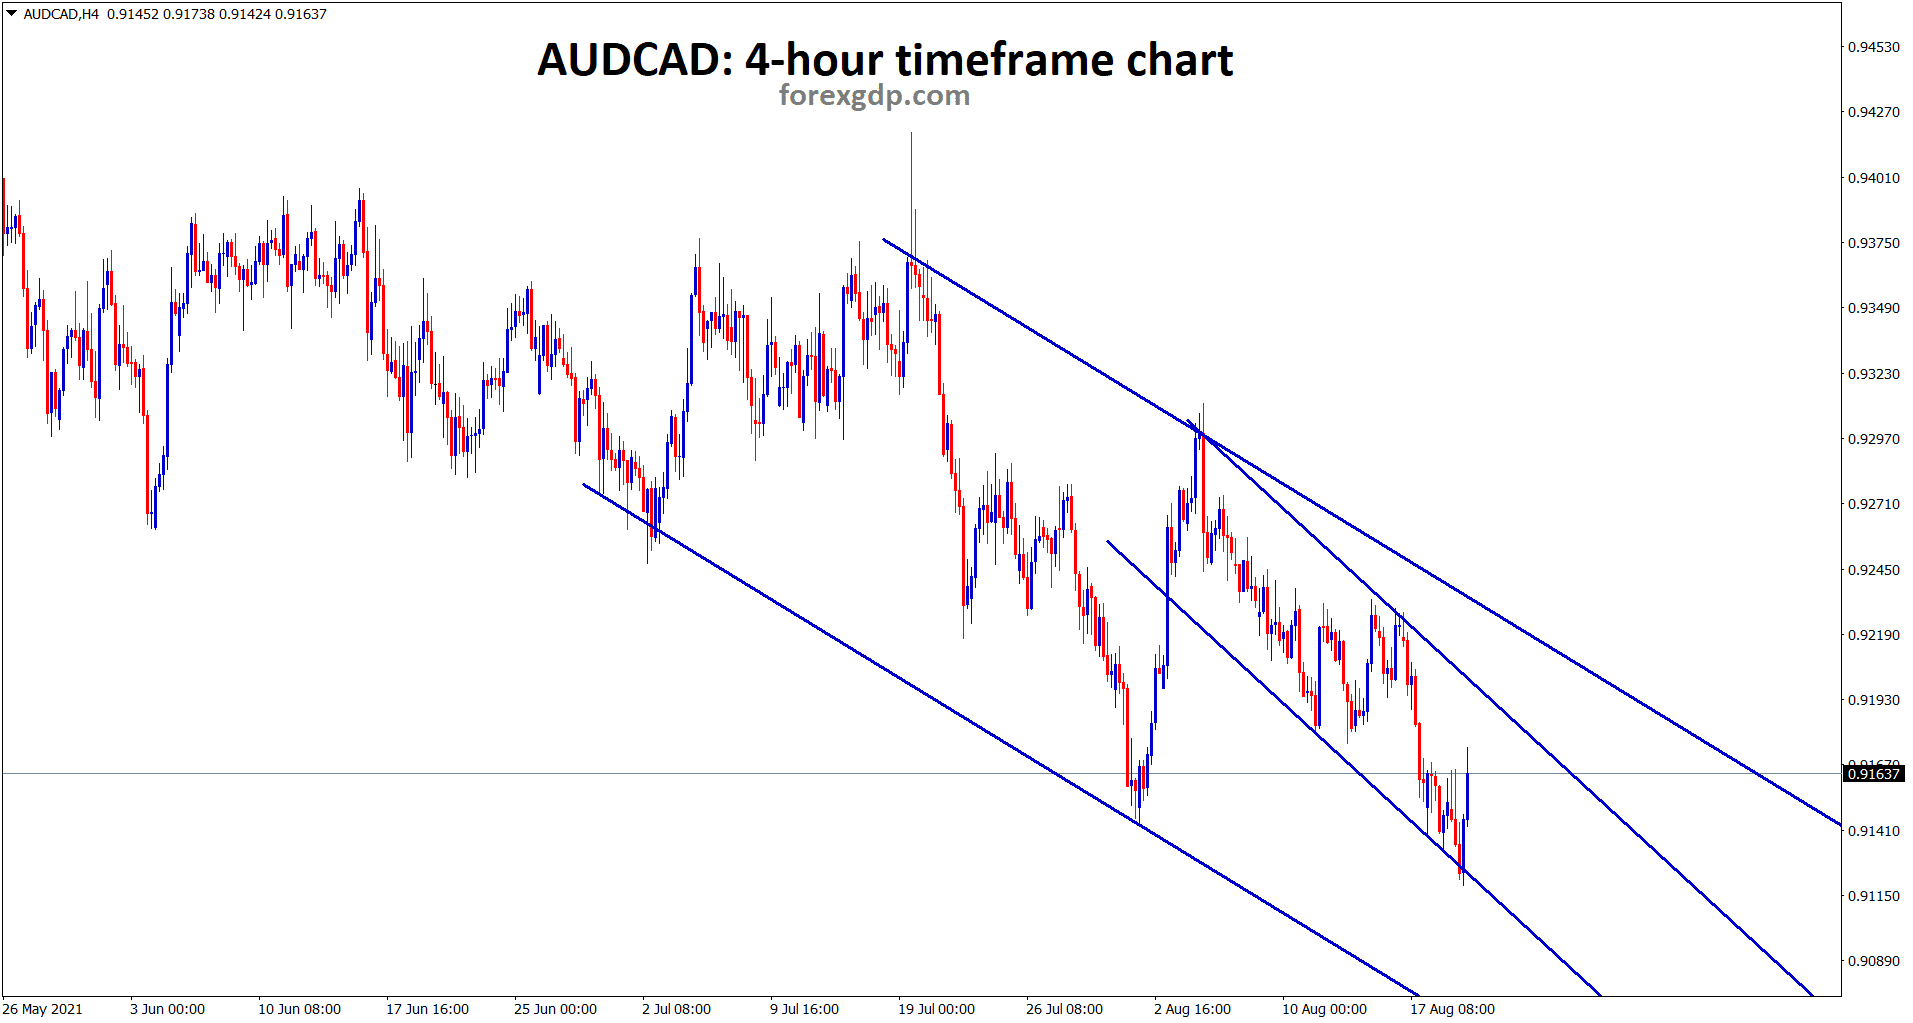 AUDCAD is bouncing back from the minor descending channel